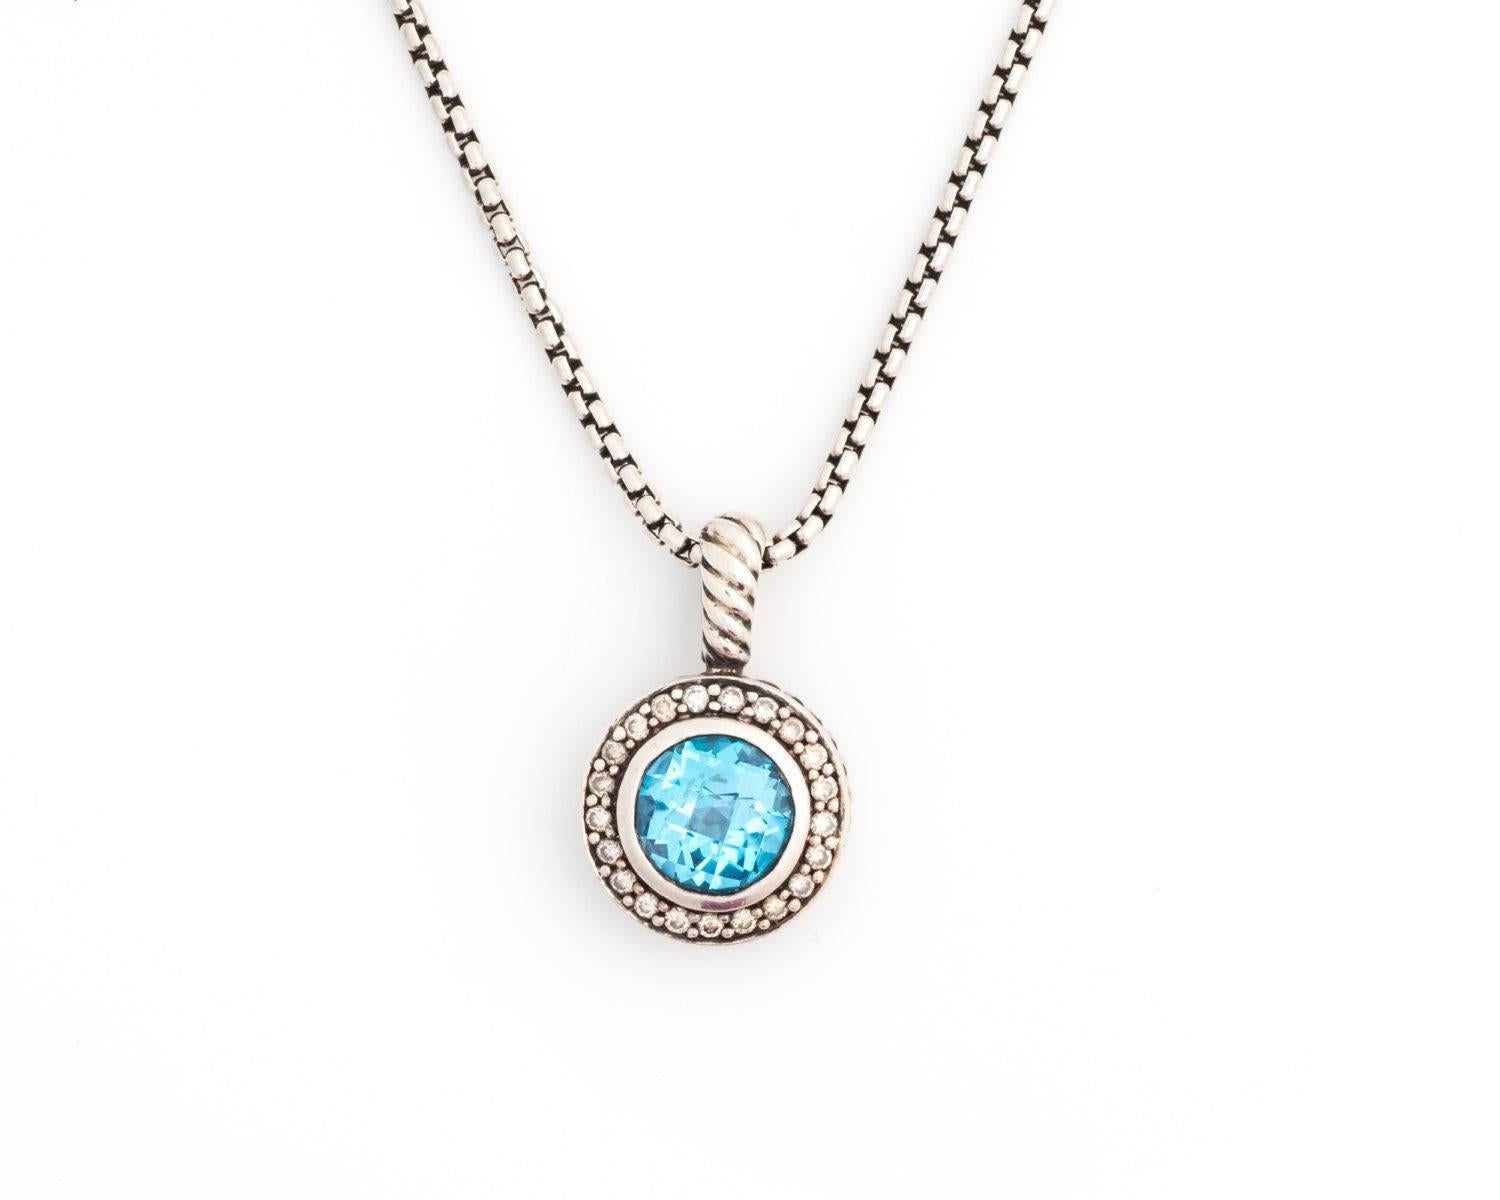 1980s David Yurman Petite Cerise Necklace with Blue Topaz and Diamonds

Features a round Blue Topaz bezel set center stone surrounded by a Diamond Halo. The Sterling Silver frame has open heart cutouts on the back. This allows light in to illuminate